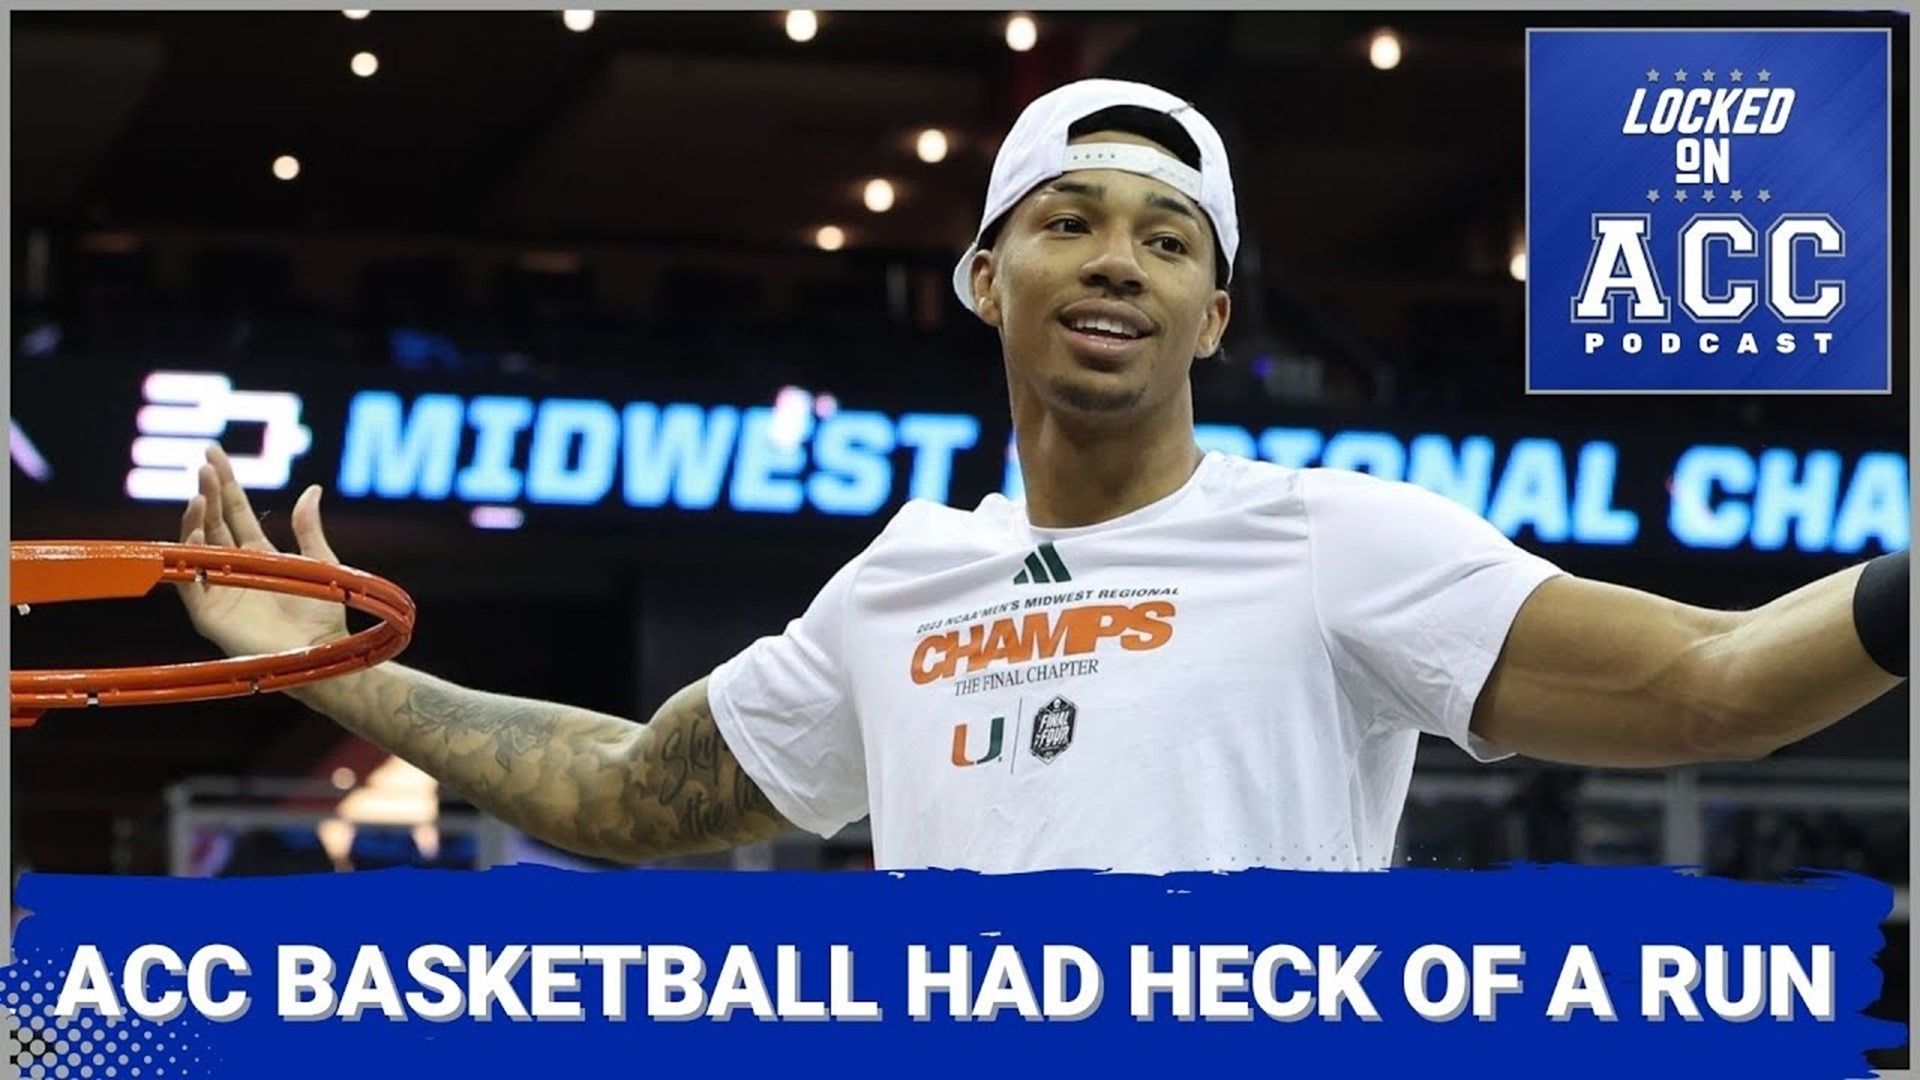 The Hokies and the Hurricanes didn't make the NCAA Championship games respectively, but the two teams kept the ACC in national conversation and turn heads.